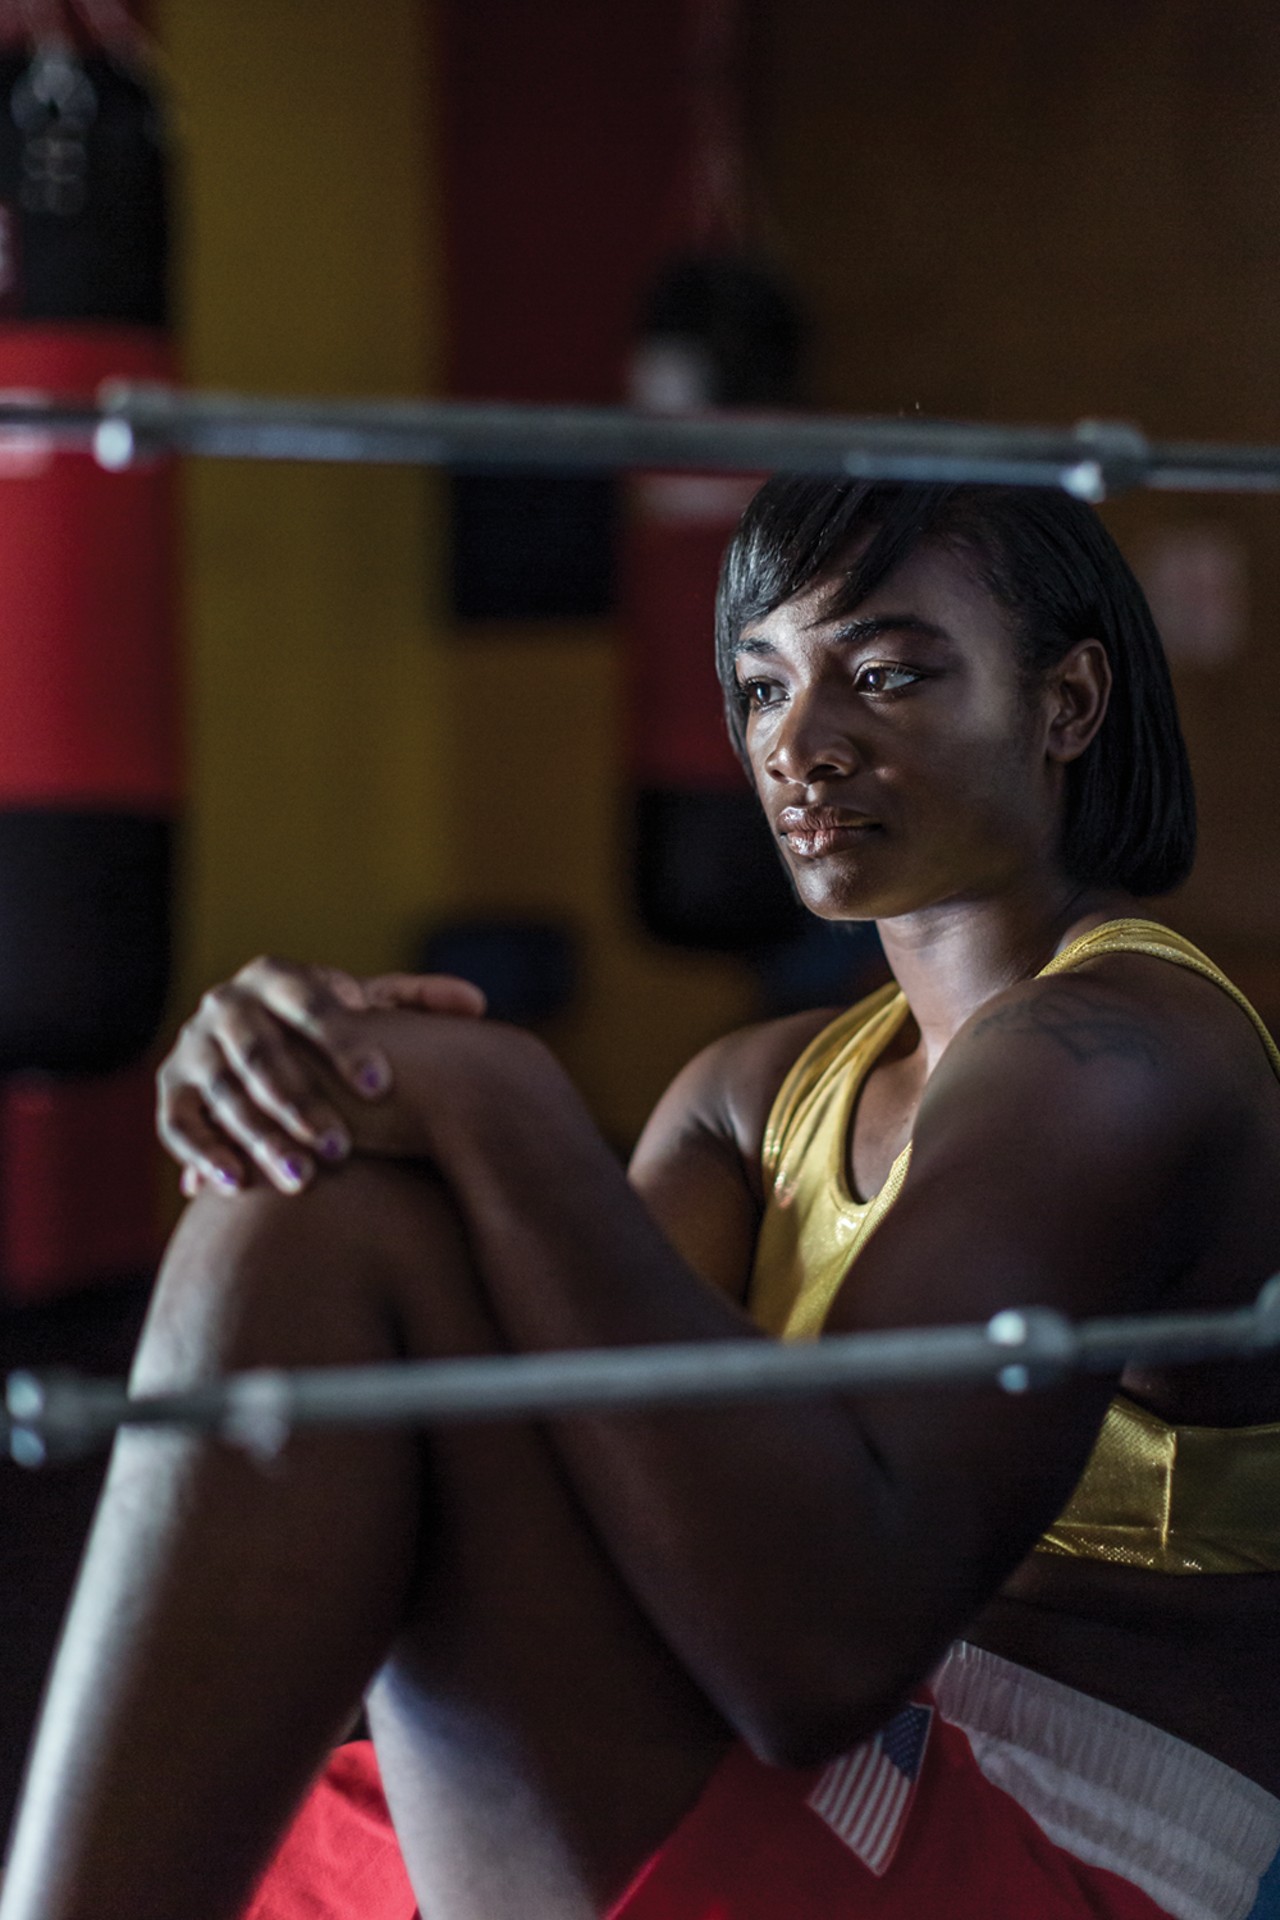 The Boxer:&nbsp;Claressa Shields
Professional Boxer and two-time Olympic Gold Medalist
&nbsp;
Claressa Shields grew up in Flint, a city long-besieged by wayward economic forces and, for the last three years, a seemingly never-ending water crisis. Her mother abused substances and her mother's boyfriend was abusive, so for many years, she lived with her grandmother. 
Shields, 22, didn't meet her father until she was 9. He spent seven years in prison, and they met upon his release. While getting to know one another, he told his daughter he wished he'd just followed his passion in life &mdash; if he'd done that, things would be different.
"After being in prison for seven years, he got out and even though he served his time, he was treated like a convict and he couldn't get a job because he was a convicted felon," Shields says. "He felt like he had served his time, but they were still punishing him. He said if he had stuck to what he was passionate about, he wouldn't have been in the situation he was in. I just asked what he was passionate about and he said boxing. I thought if I were ever to do something big for my dad, it would be boxing. "
Tough from a young age, Shields says she could hold her own against the boys at school. "I could slam guys," she says. "I was able to do that stuff when I was younger."
By 11, she wandered into a local gym and began beating on the boys with such a fury that coach Jason Crutchfield could no longer ignore her innate talent, her obvious strength. But when she asked her dad to sign her up for boxing lessons, she didn't get the answer she expected. 
"He said no. [He said] boxing was a man's sport and added on that I was too pretty to box," Shields says. 
Egged on by her grandmother, Shields continued to train and eventually moved in with Crutchfield and his wife, becoming a family member as well as a mentee. 
Under Crutchfield's tutelage, a 16-year-old Shields qualified for the 2012 Olympics, where she competed against women whose experience far exceeded her own. Against all odds, she came home from London with a gold medal.
There is no doubt in Shields mind that she is the best boxer there is. She will tell you as much. Yet, the type of success male boxers experience has eluded her. Even after making history at the Olympics, she couldn't get a sponsorship deal. Brands were not clamoring to endorse her. It's been a slow, rocky journey and it's nowhere near over.
In 2016, Shields returned to the Olympics and came home with another gold medal, making her the only American Olympic boxer to win the title consecutively. Since then, the pace of her ascension to fame and fortune has moved from glacial to simply unhurried. She recently won a Nickelodeon Kids' Choice Sports award, an honor she seems as grateful for as those gold medals. 
But, what she really wants is money. She wants a million-dollar fight. On Aug. 4,  after only four matches as a professional boxer, she went up against 30-year-old, undefeated Nikki Adler at the MGM Grand Detroit for the World Boxing Council super middleweight title &mdash; and won. 
The fight was Shields' second for Showtime, an opportunity that surely came with some cash. Yet, until women boxers are earning seven-figures per fight, Shields isn't going to stop demanding what she deserves. 
"I want to break those barriers and erase those lines between women's boxing and men's boxing. I want to be there when we get equal pay and we have the same opportunity as men to box," she says. "Women should get equal pay and equal TV time and I hope by the end of my career, we're over that hump." 
By Alysa Zavala-Offman